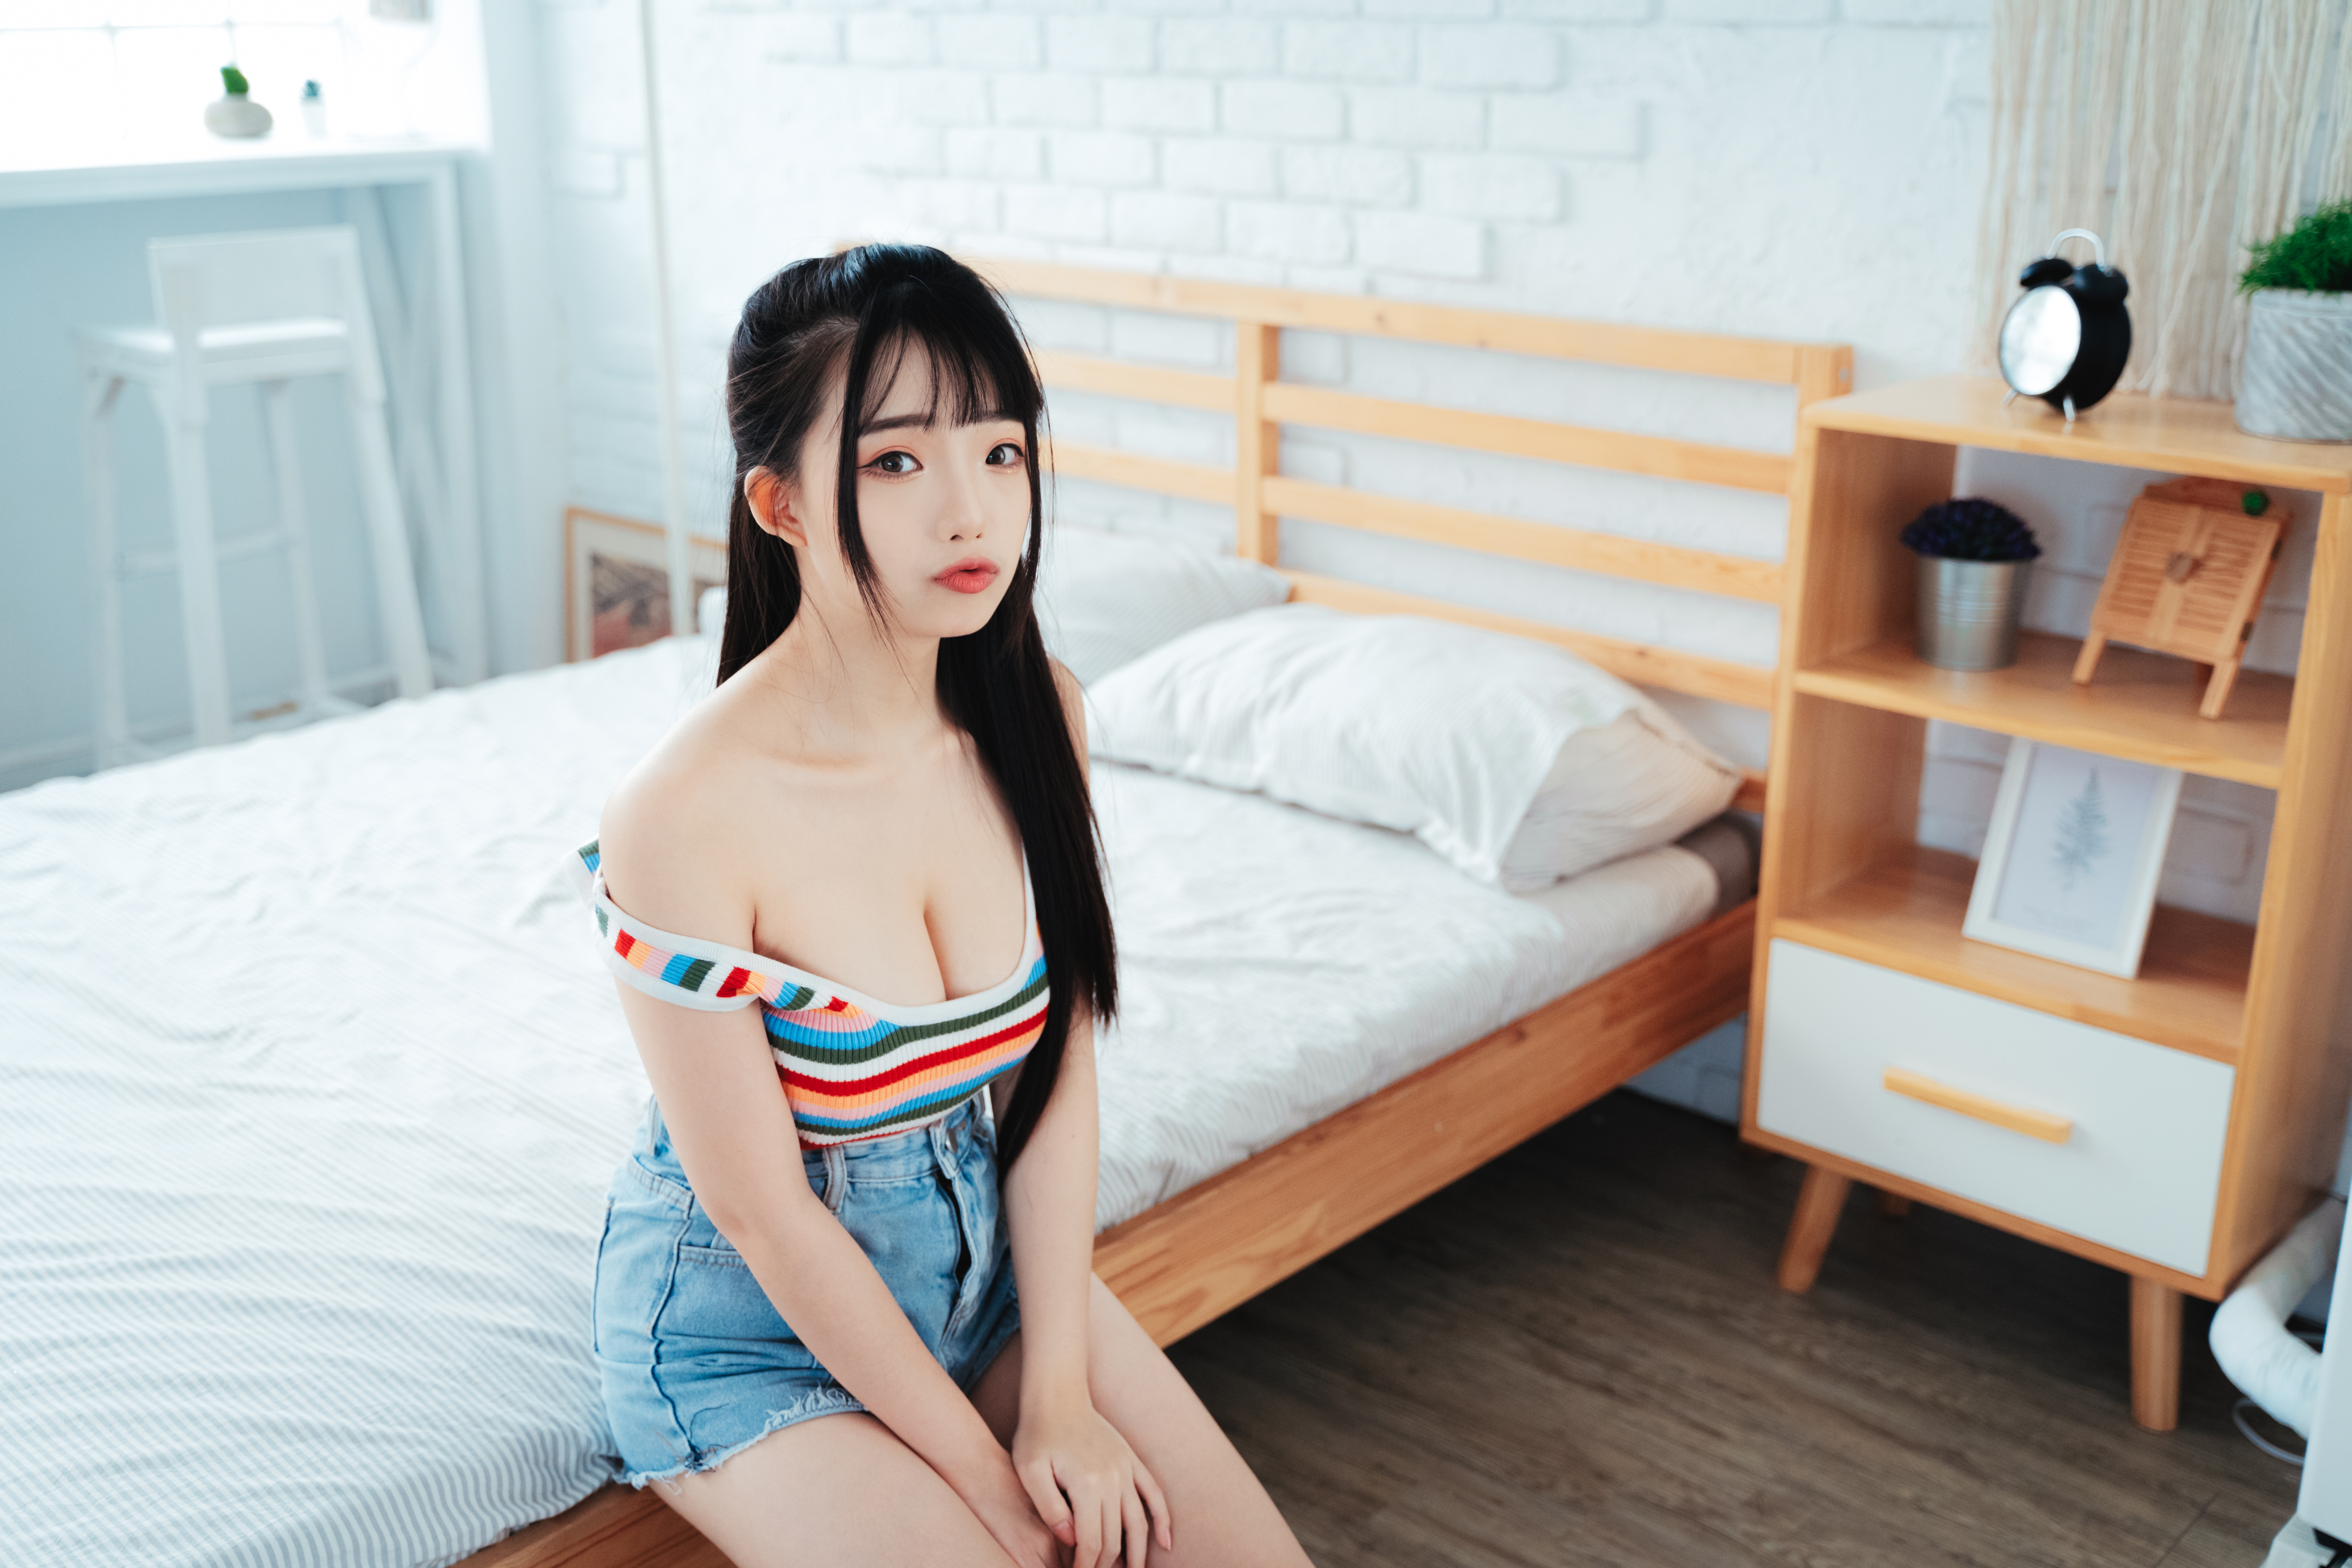 People 6000x4000 Ning Shioulin women model cleavage striped tops jean shorts Asian brunette bare shoulders indoors women indoors in bed sitting